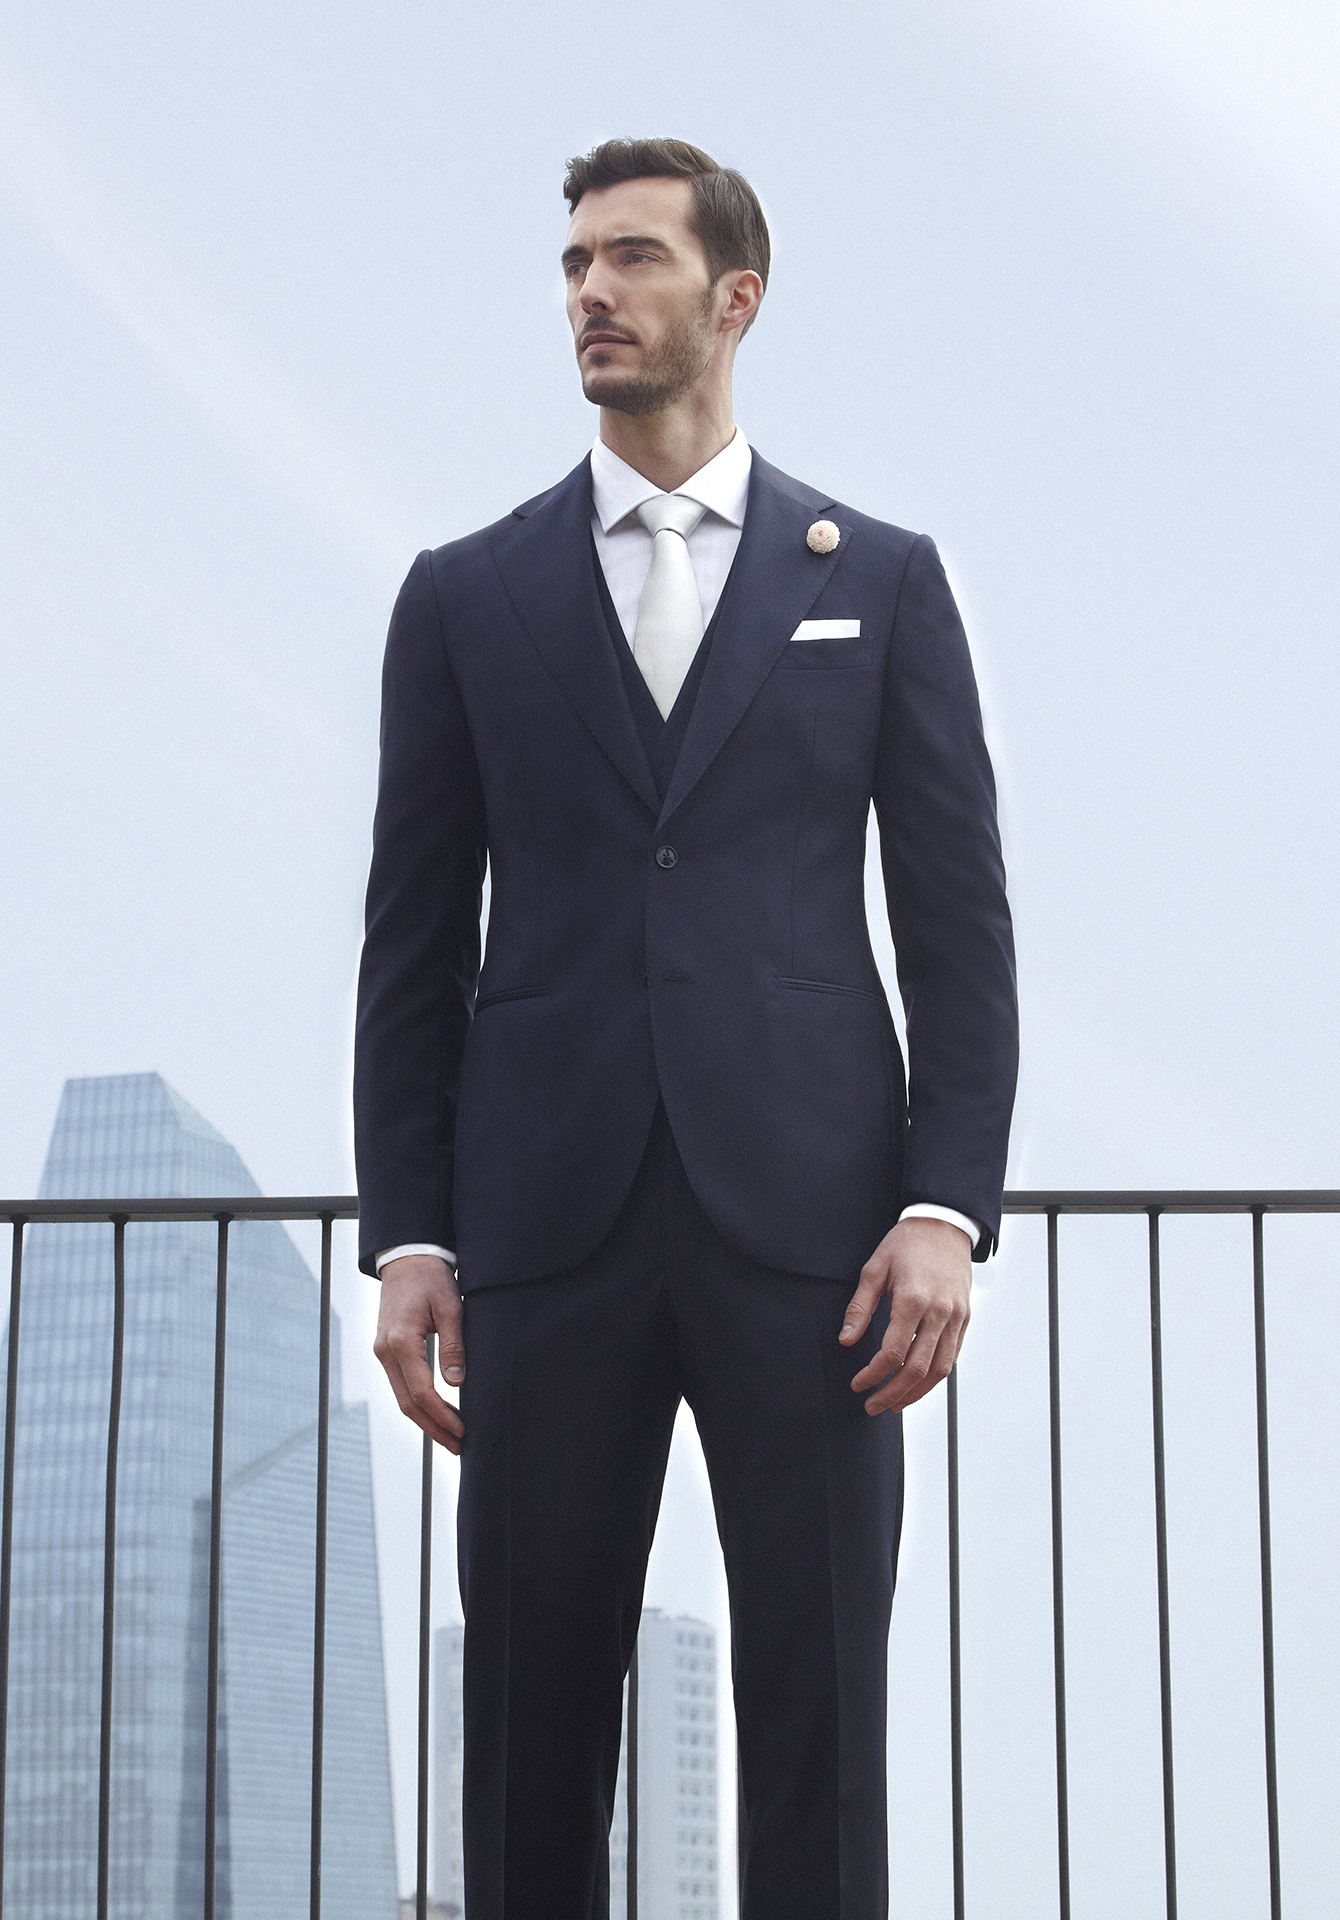 Midnight blue double-breasted ceremony suit with white pocket square and buttonhole